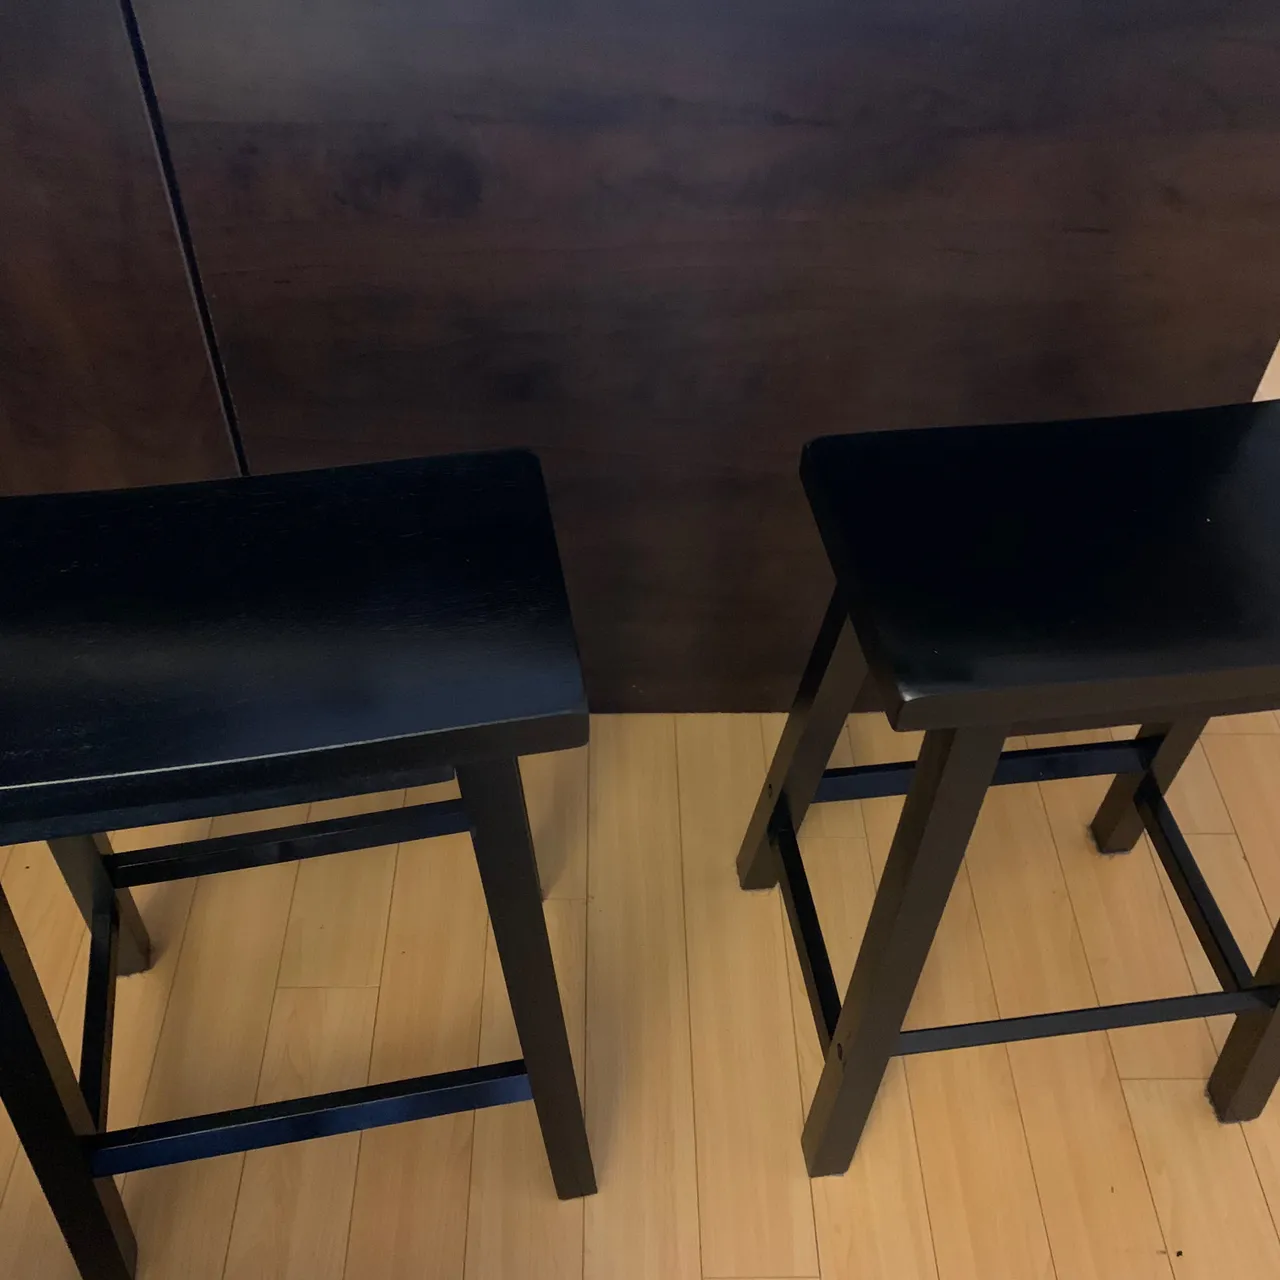 2 black bar stools. Purchased 10 months ago photo 1